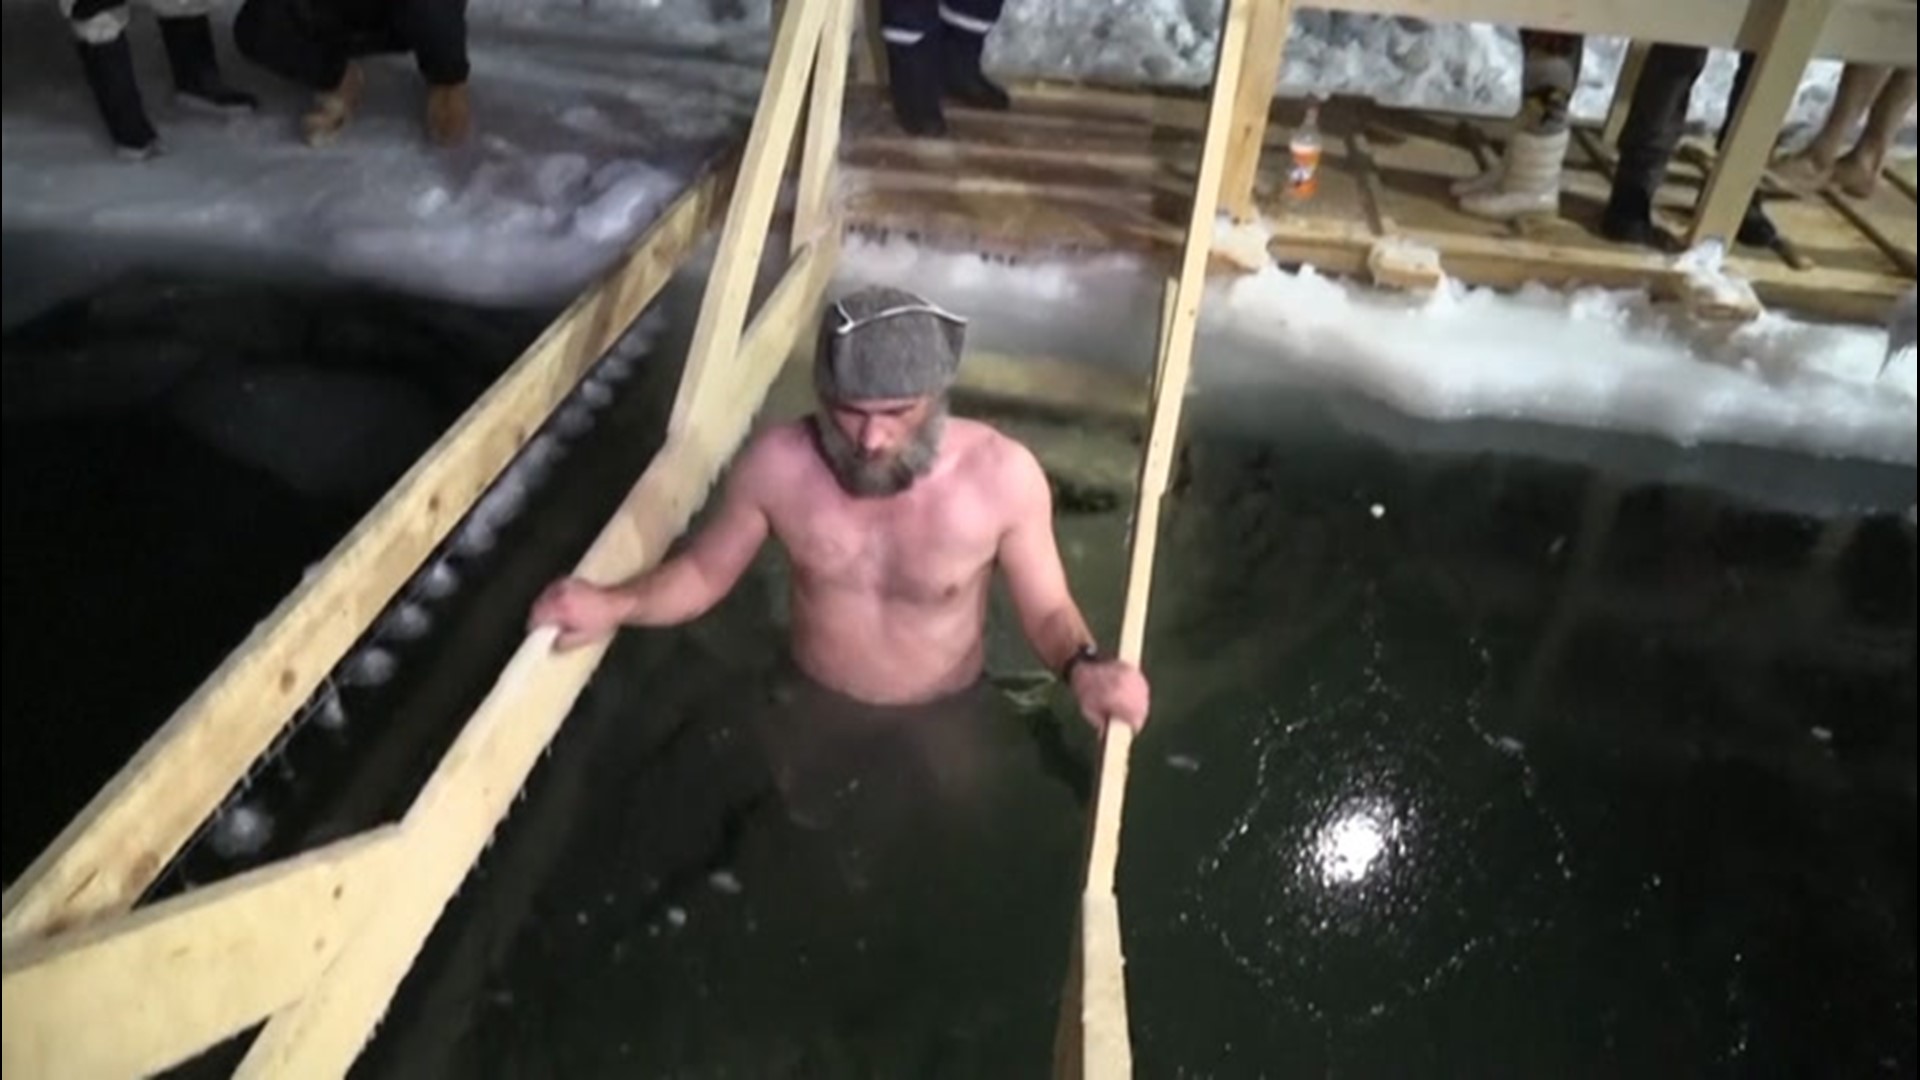 Russian Orthodox Christians have an annual tradition of braving freezing temperatures for a dip in icy waters to celebrate the baptism of Jesus Christ.